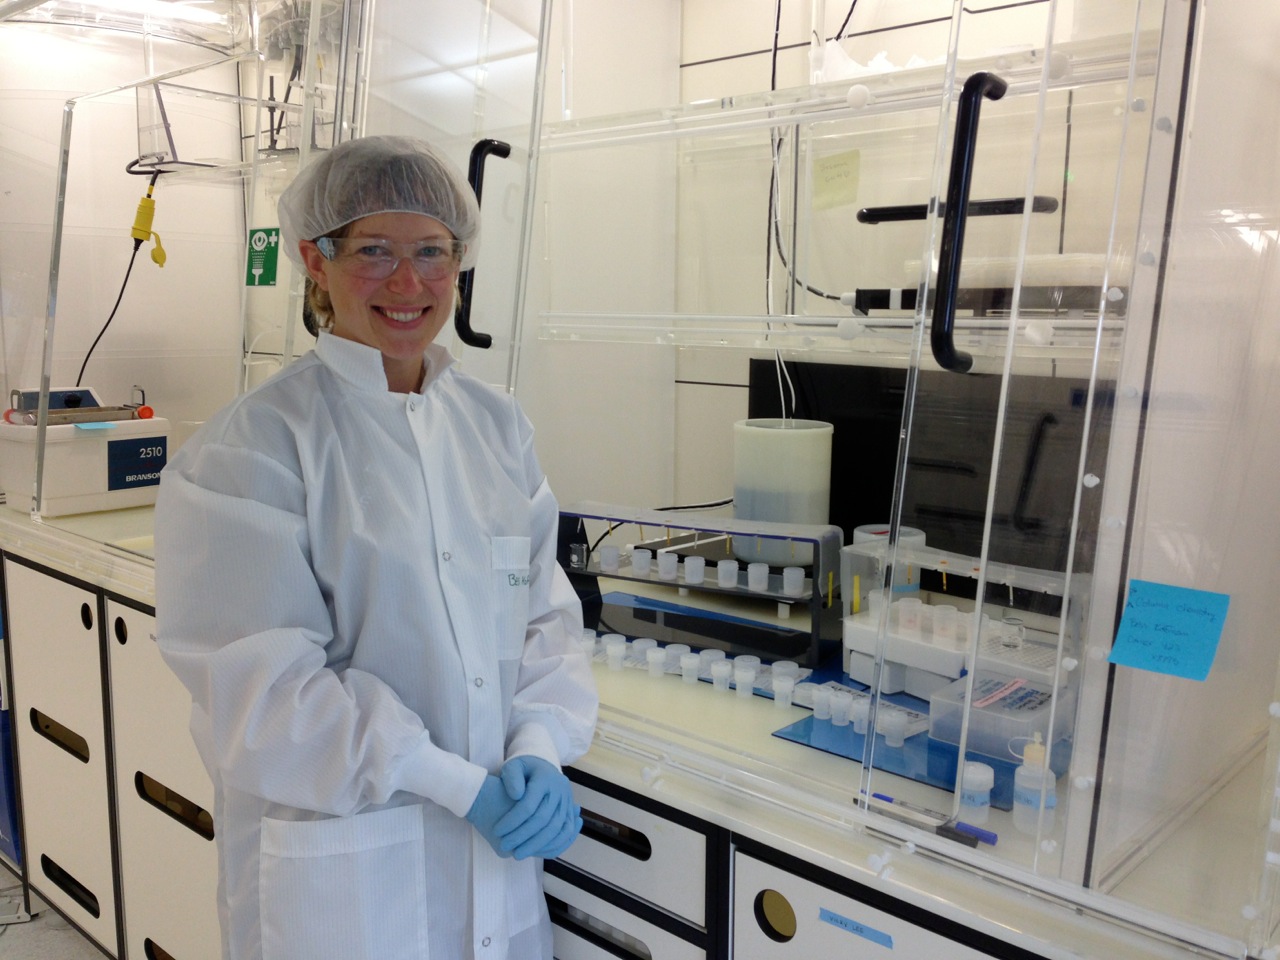 The New Zealand and Antarctic dust samples are dissolved and purified for isotope analysis at Columbia University's Lamont-Doherty Earth Observatory